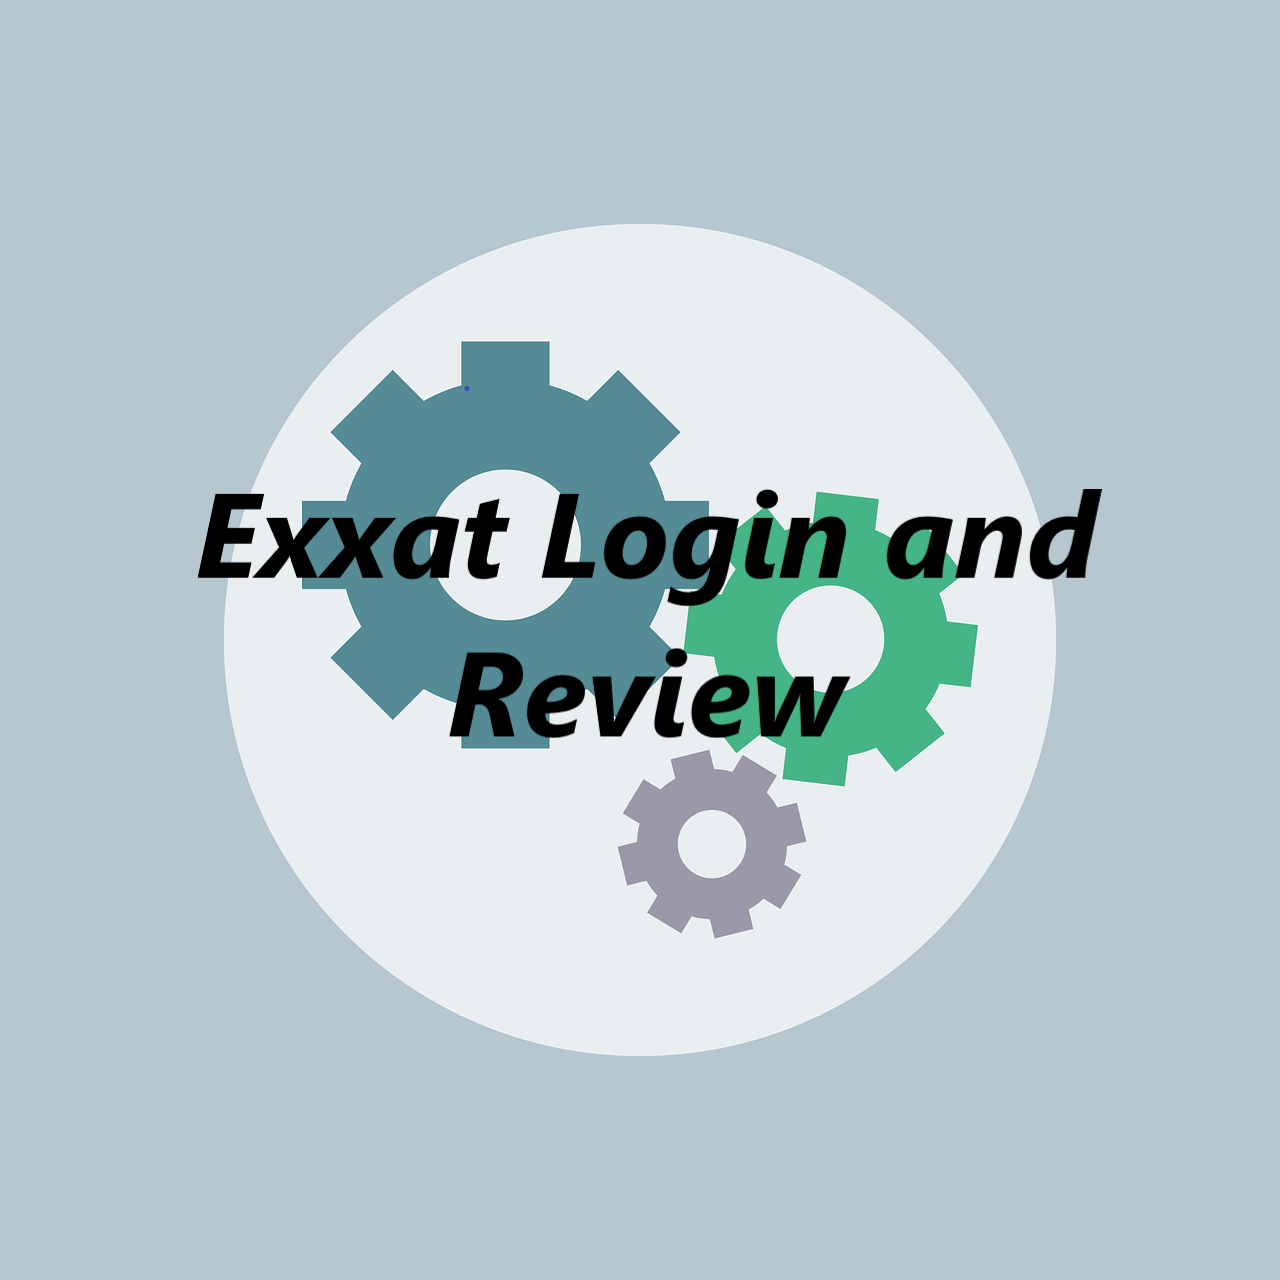 Exxat Login and Review image